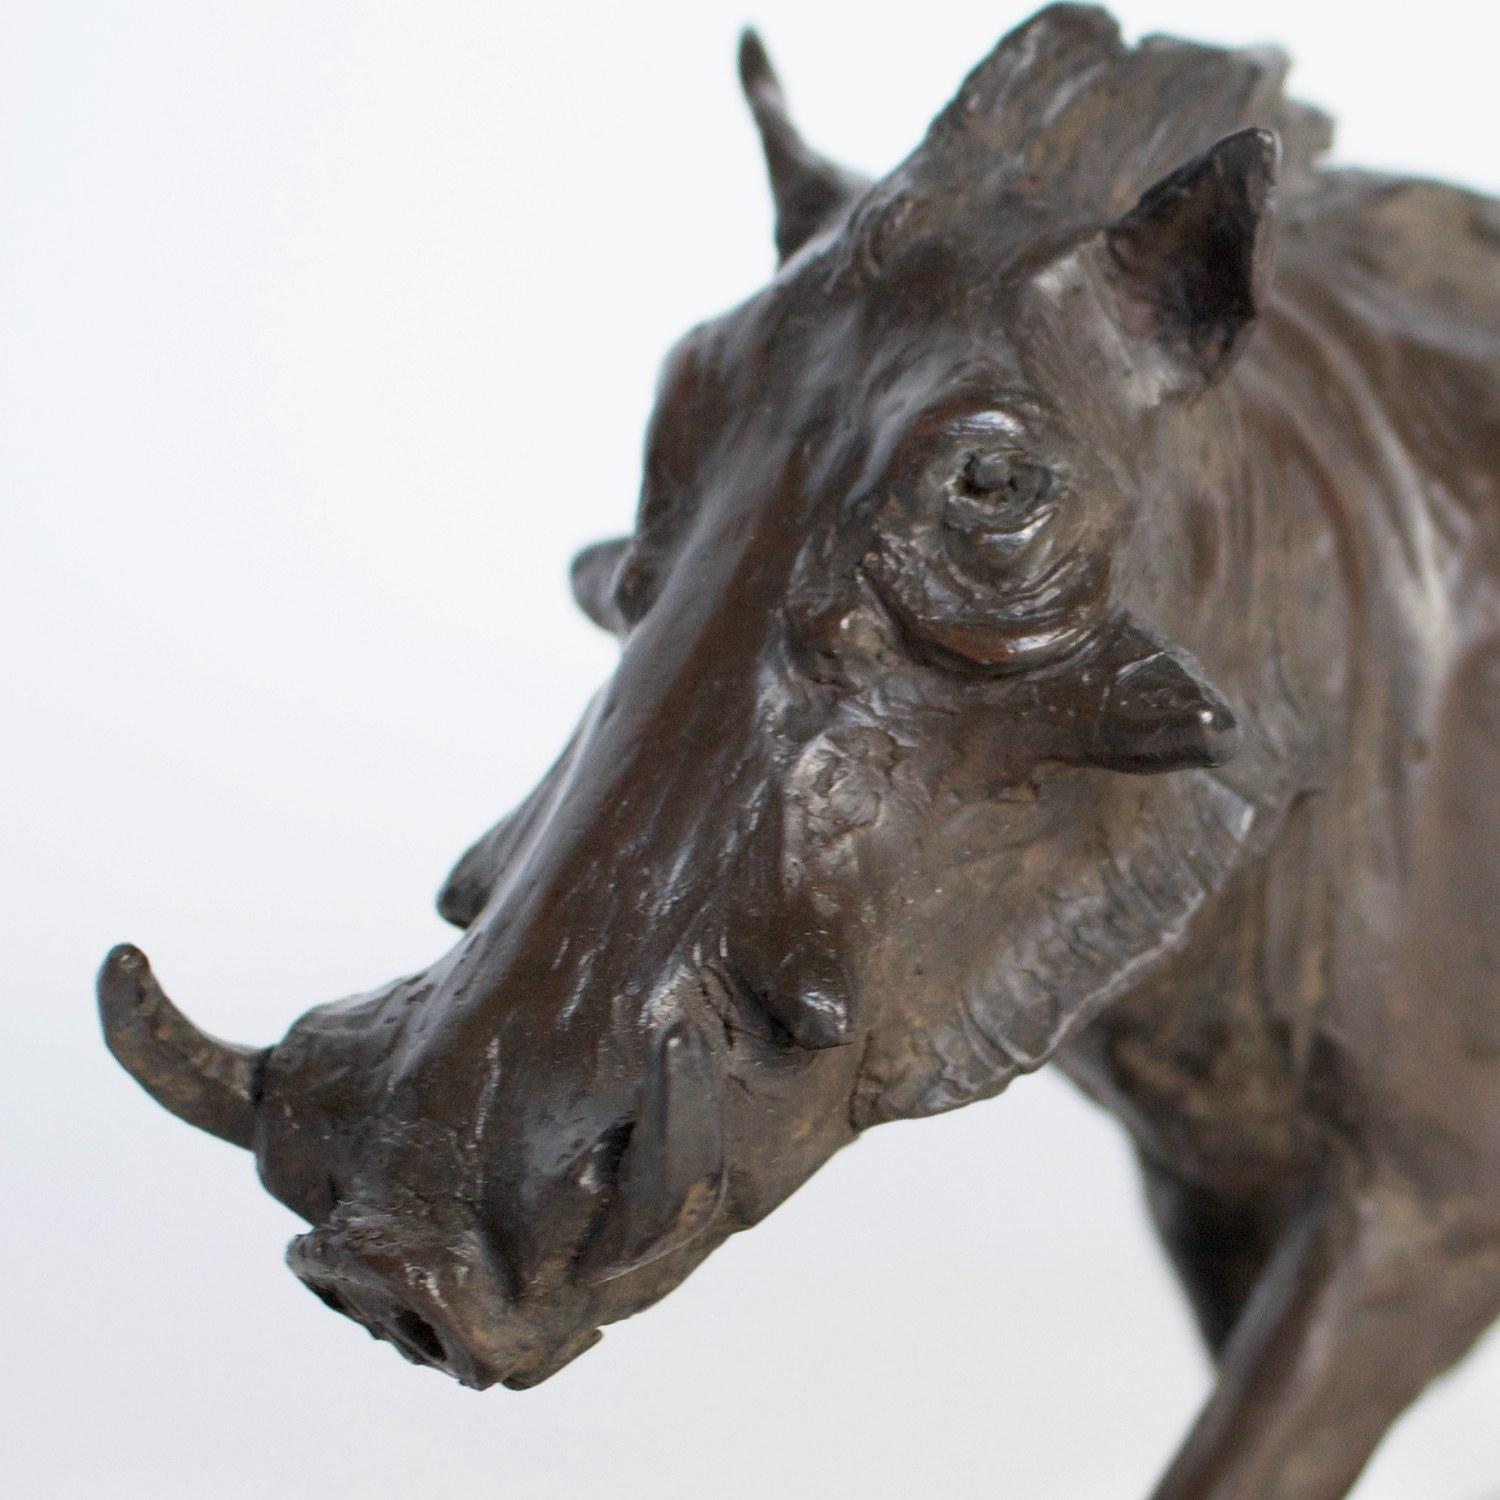 English Contemporary Bronze Sculpture of a Trotting Warthog by Jenna Gearing